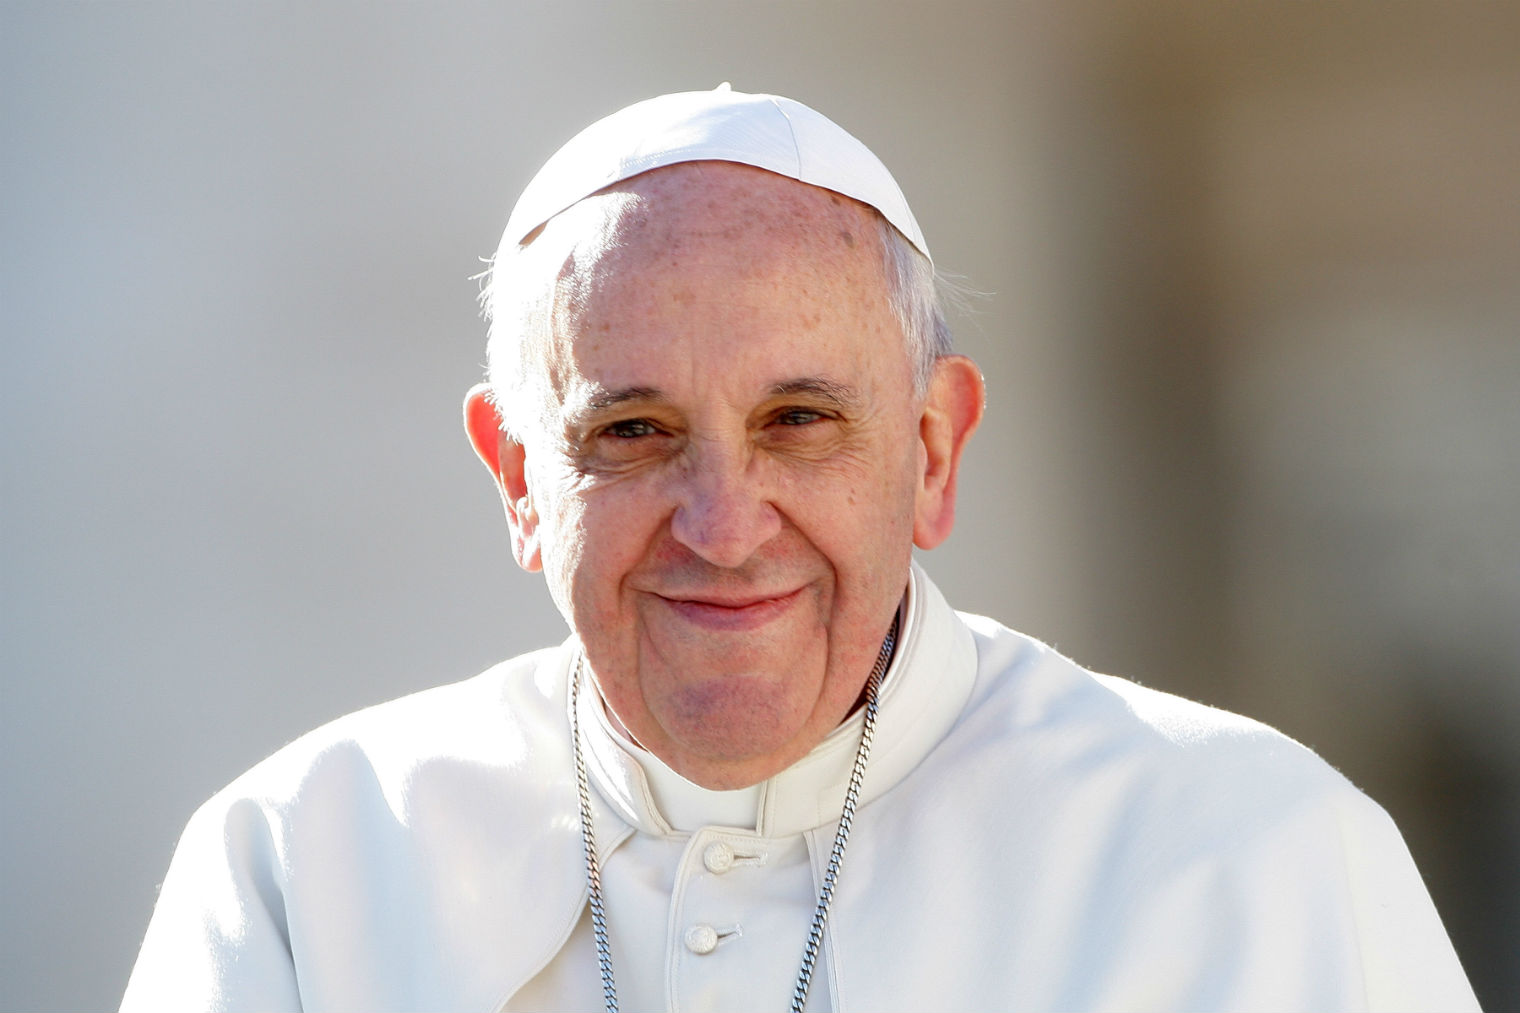 Image: Luciferian Pope Francis REFUSES to call aborted babies “persons” worthy of dignity